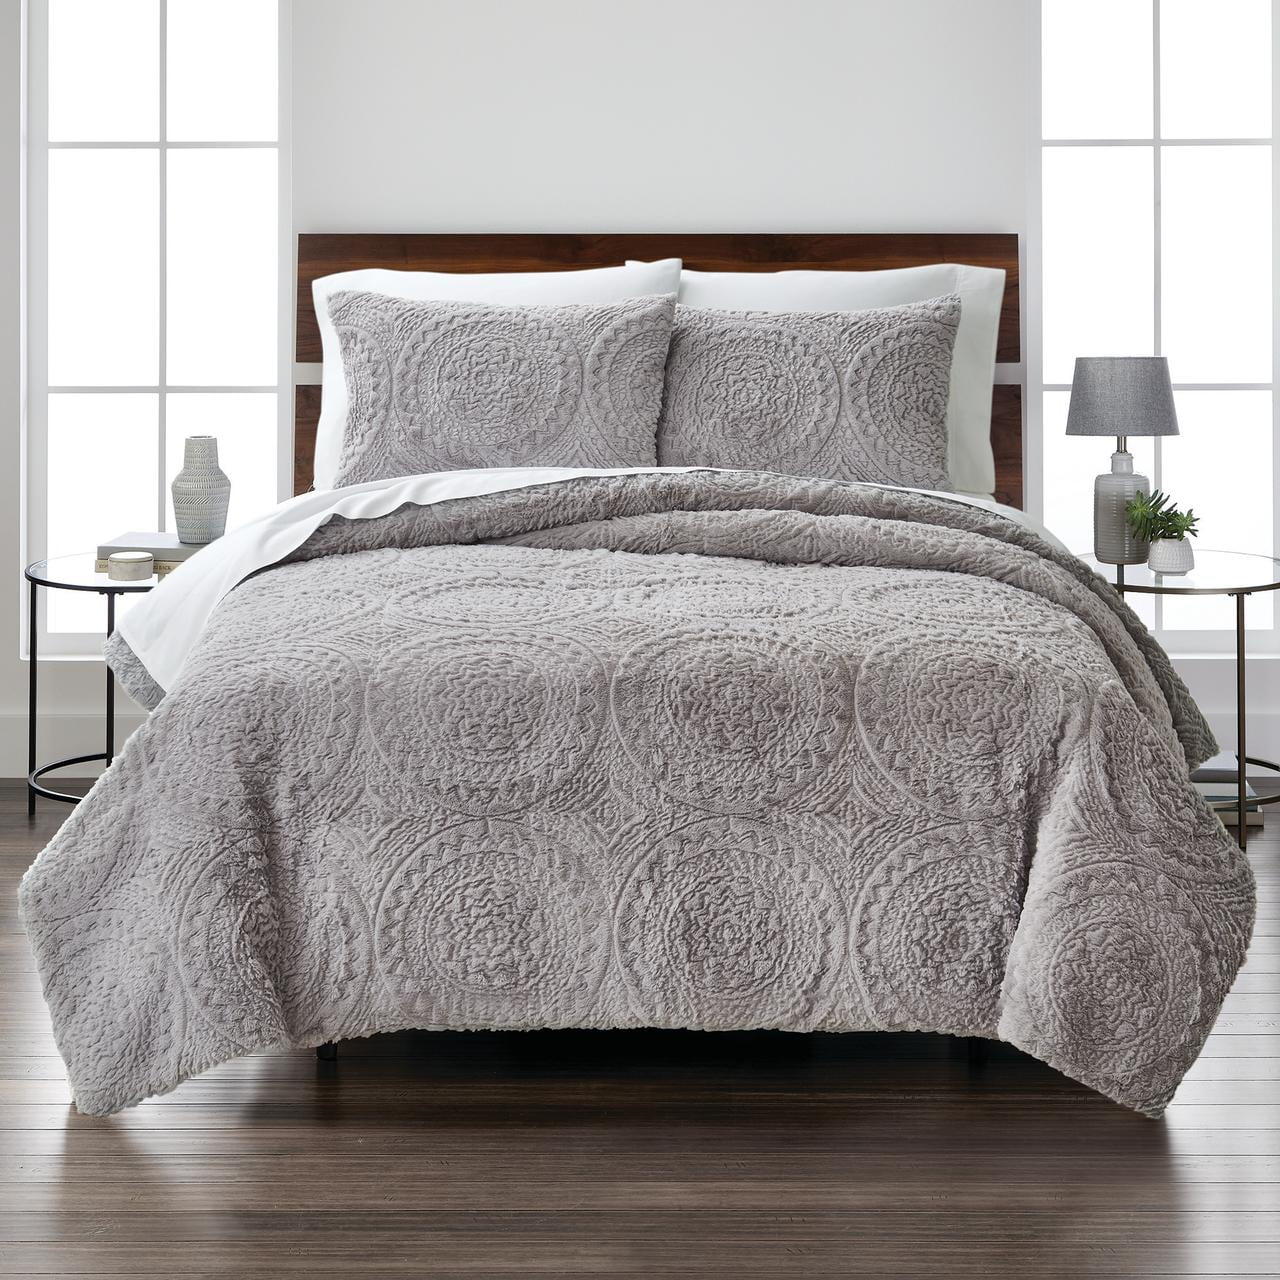 Better Homes & Gardens 3-piece Grey Embroidered Faux Fur Comforter Set, Full/Queen